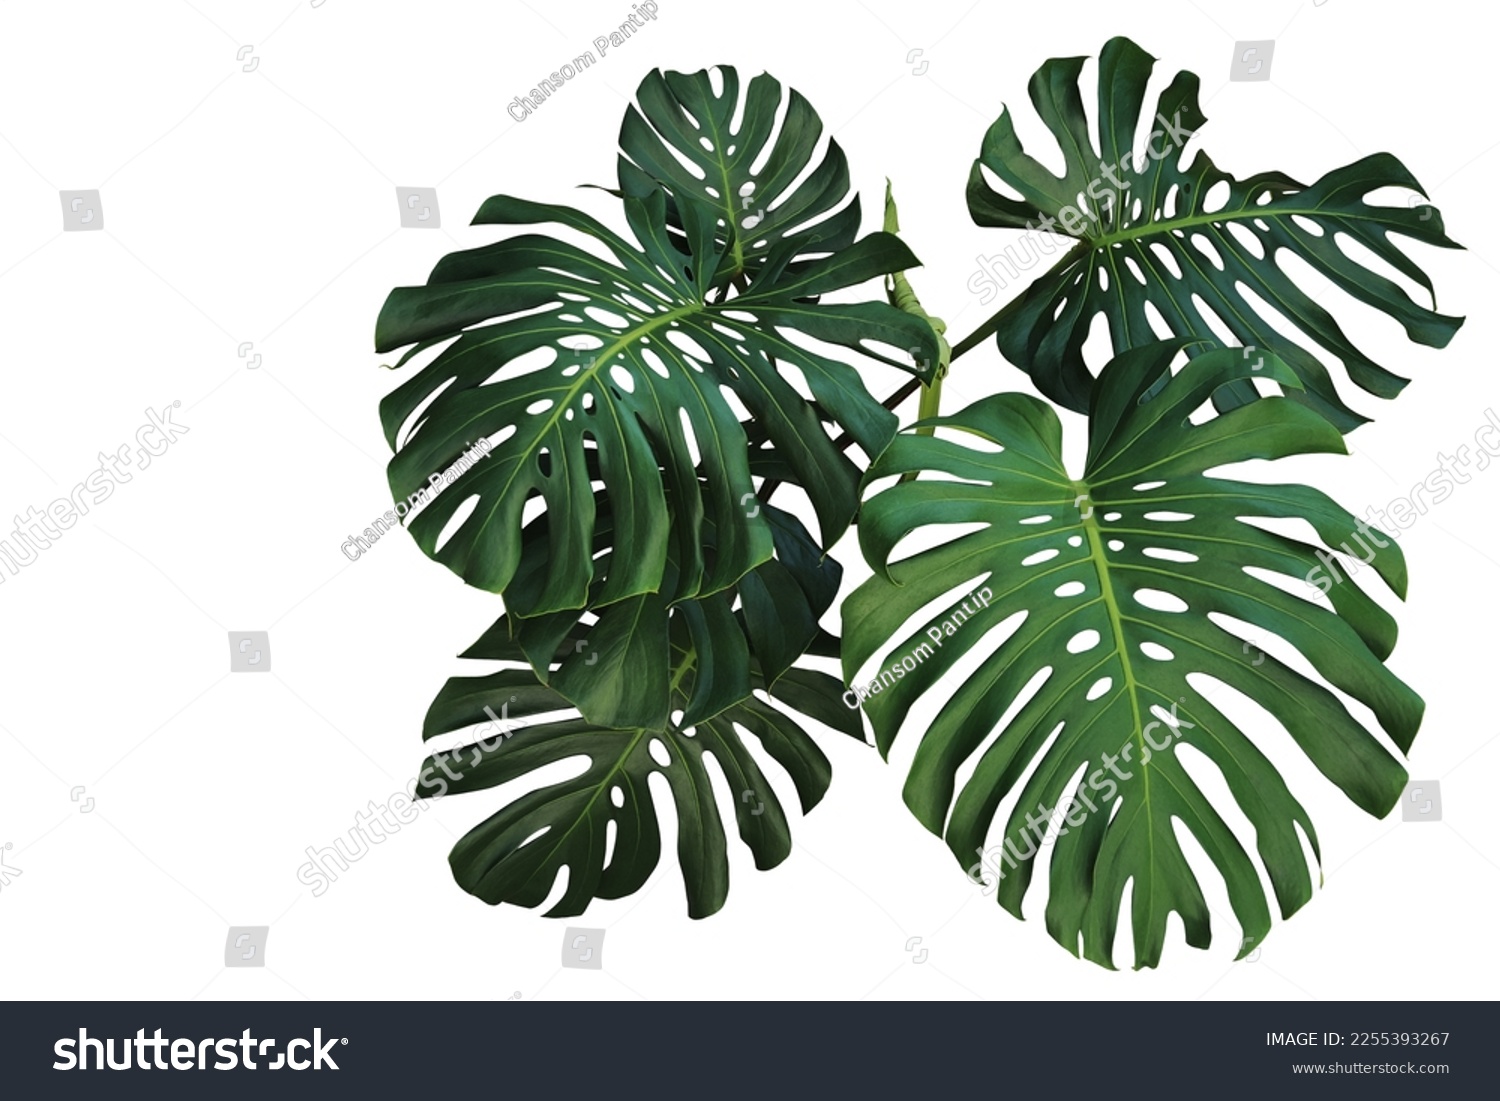 Dark green leaves of monstera or split-leaf philodendron (Monstera deliciosa) the tropical foliage plant bush popular houseplant isolated on white background, clipping path included. #2255393267